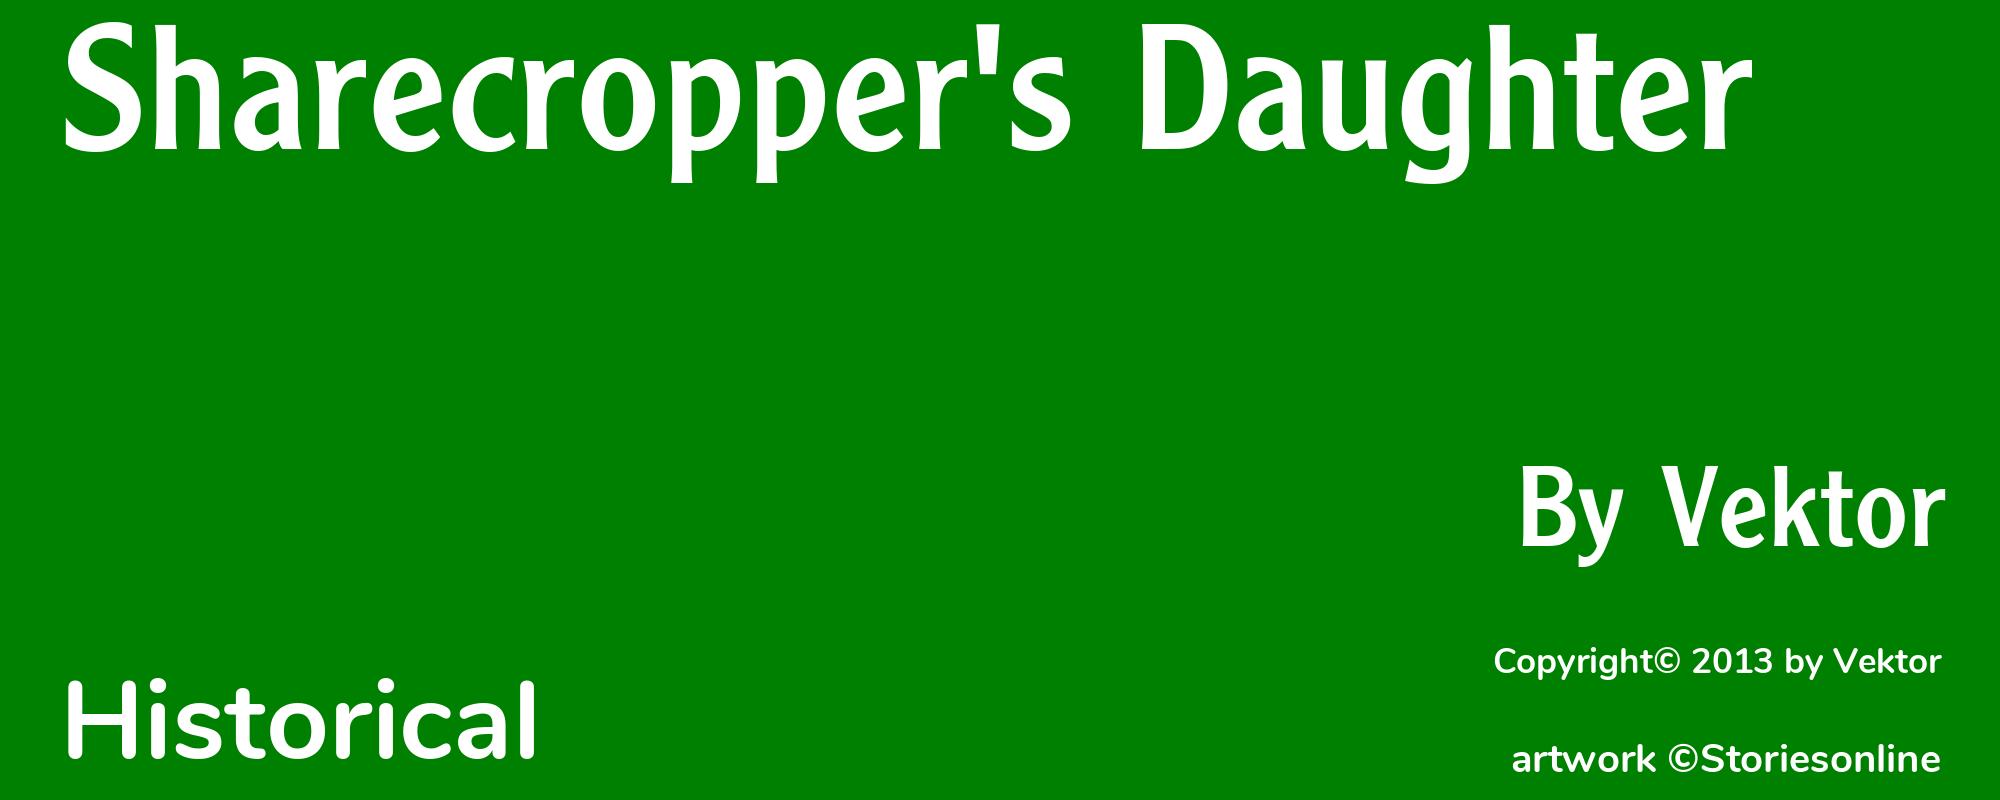 Sharecropper's Daughter - Cover